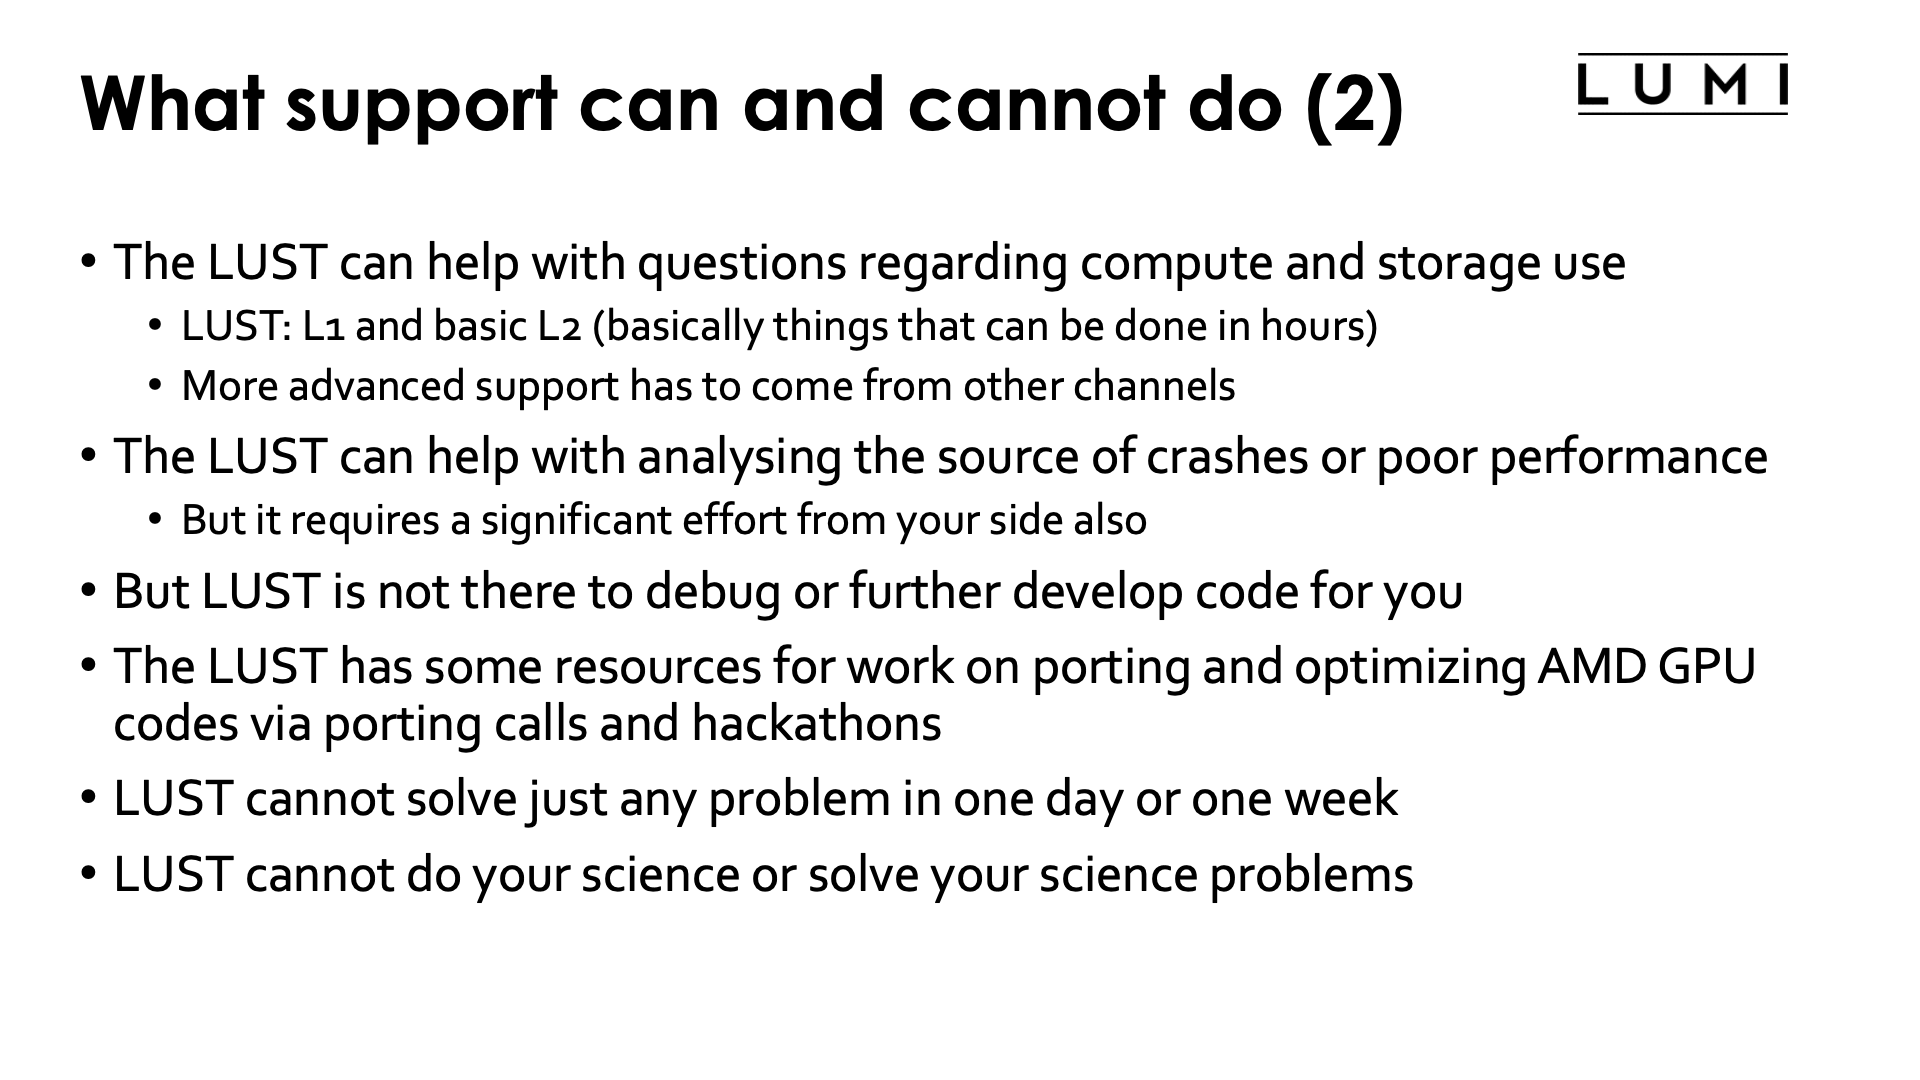 What support can and cannot do (2)